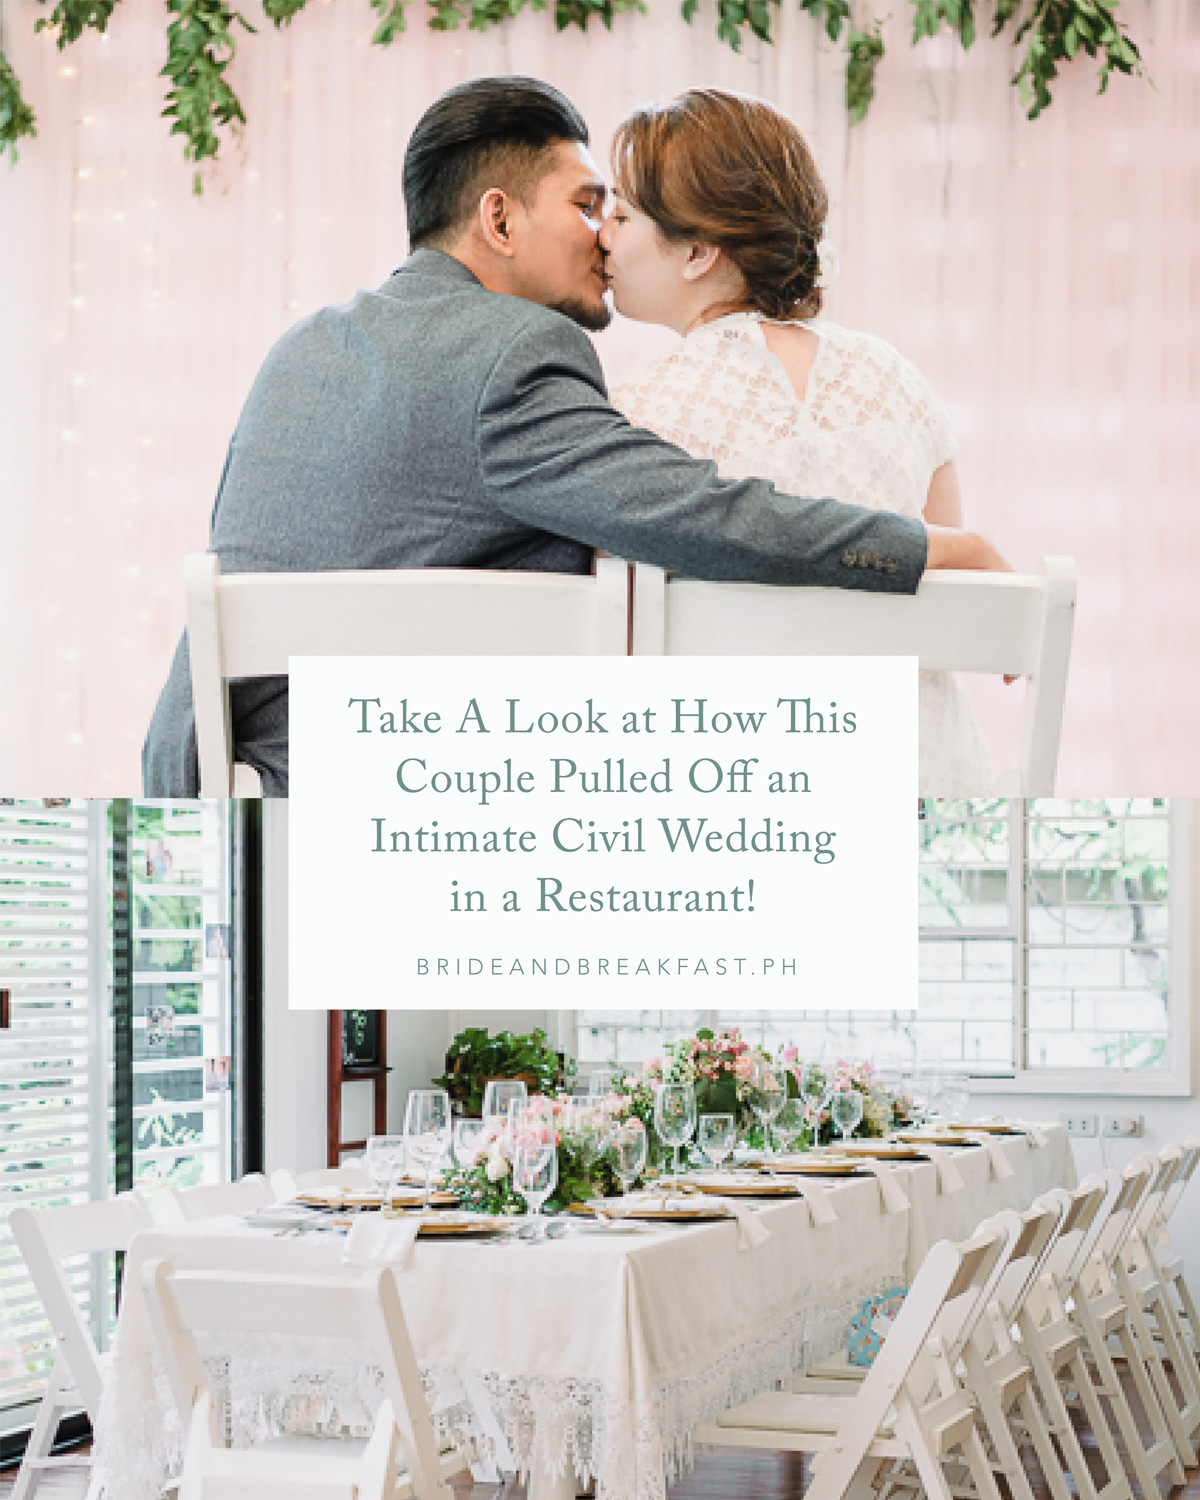 Take A Look at How This Couple Pulled Off an Intimate Civil Wedding in a Restaurant!